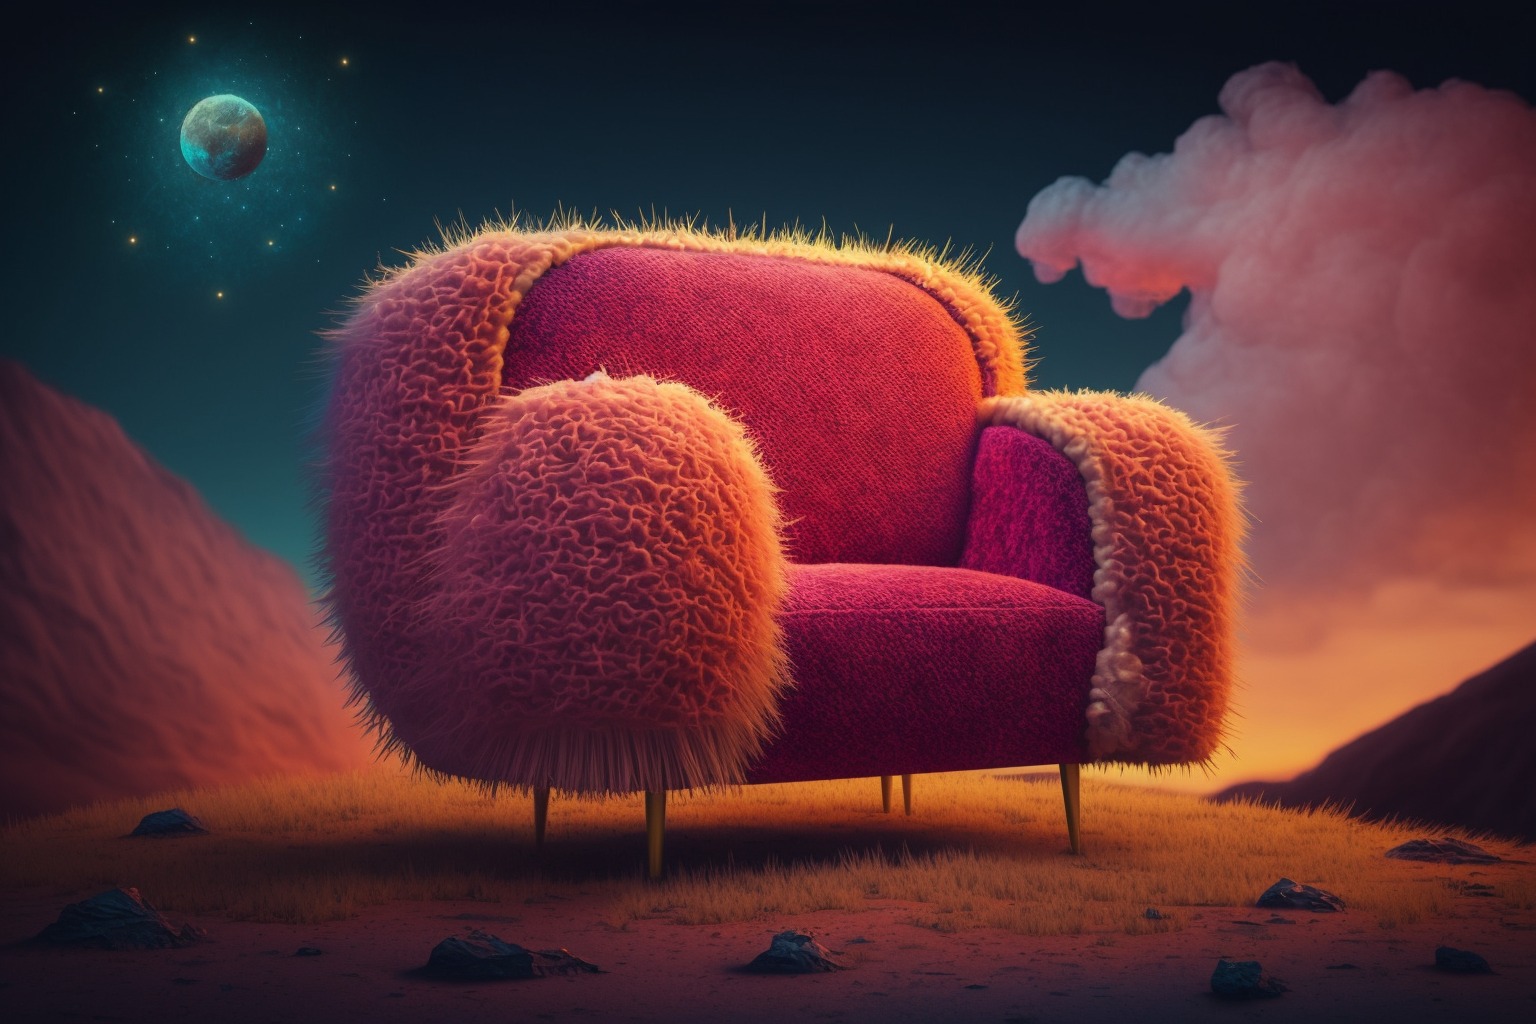 nixie13_a_hirsute_style_lounge_chair__based_off_unique_abstract_60342c29-9415-4daa-b291-9fd5c75ee64e